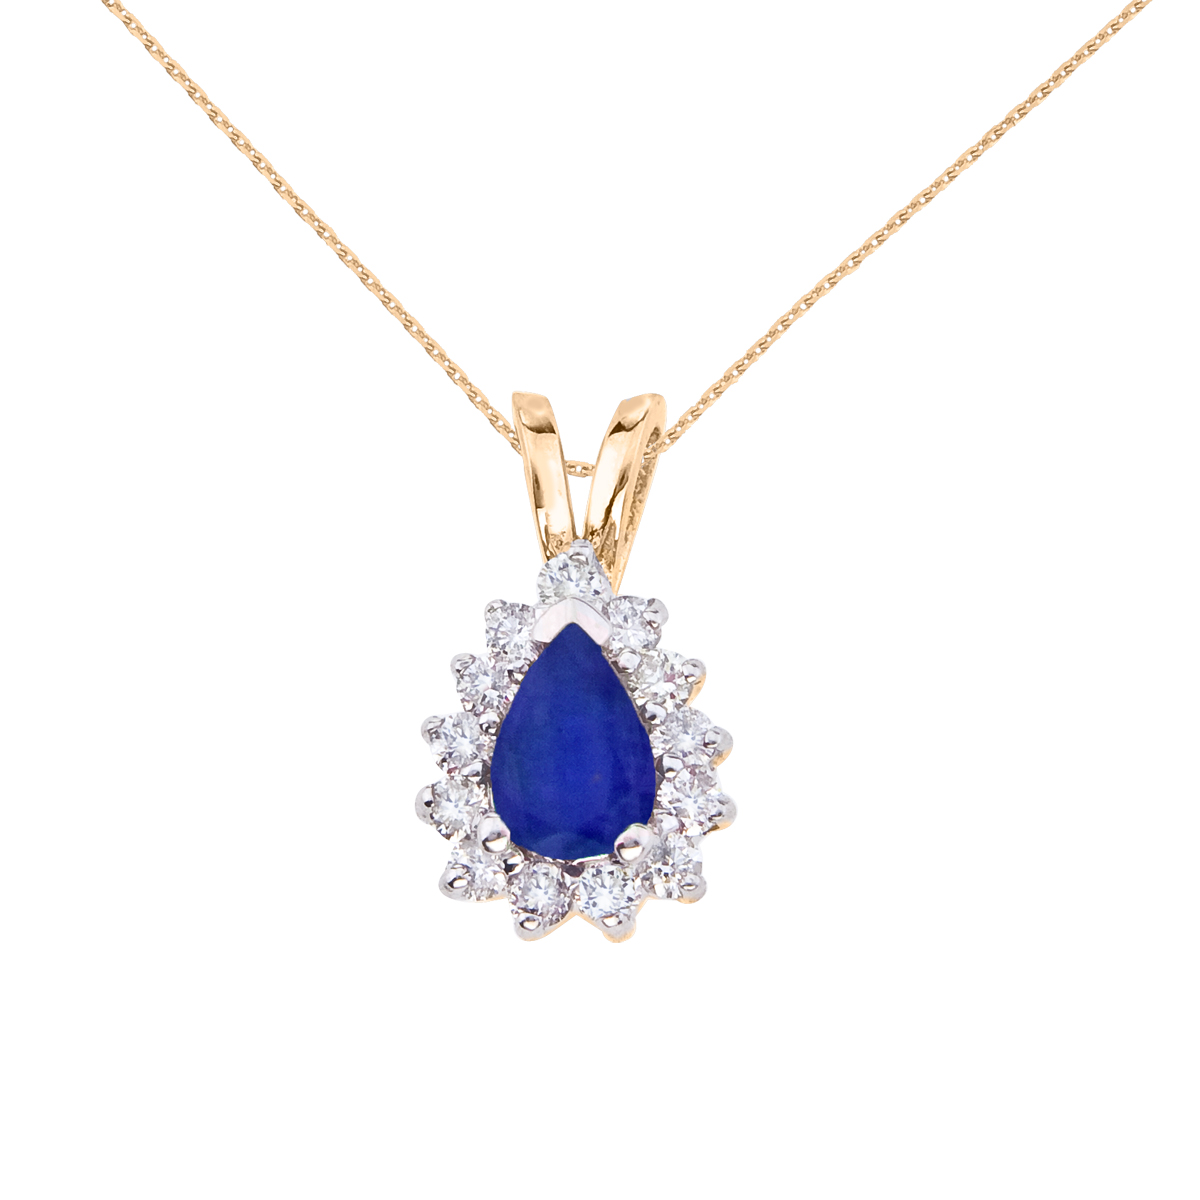 6x4 mm oval natural sapphire pendant accented with bright diamonds set in 14k yellow gold.